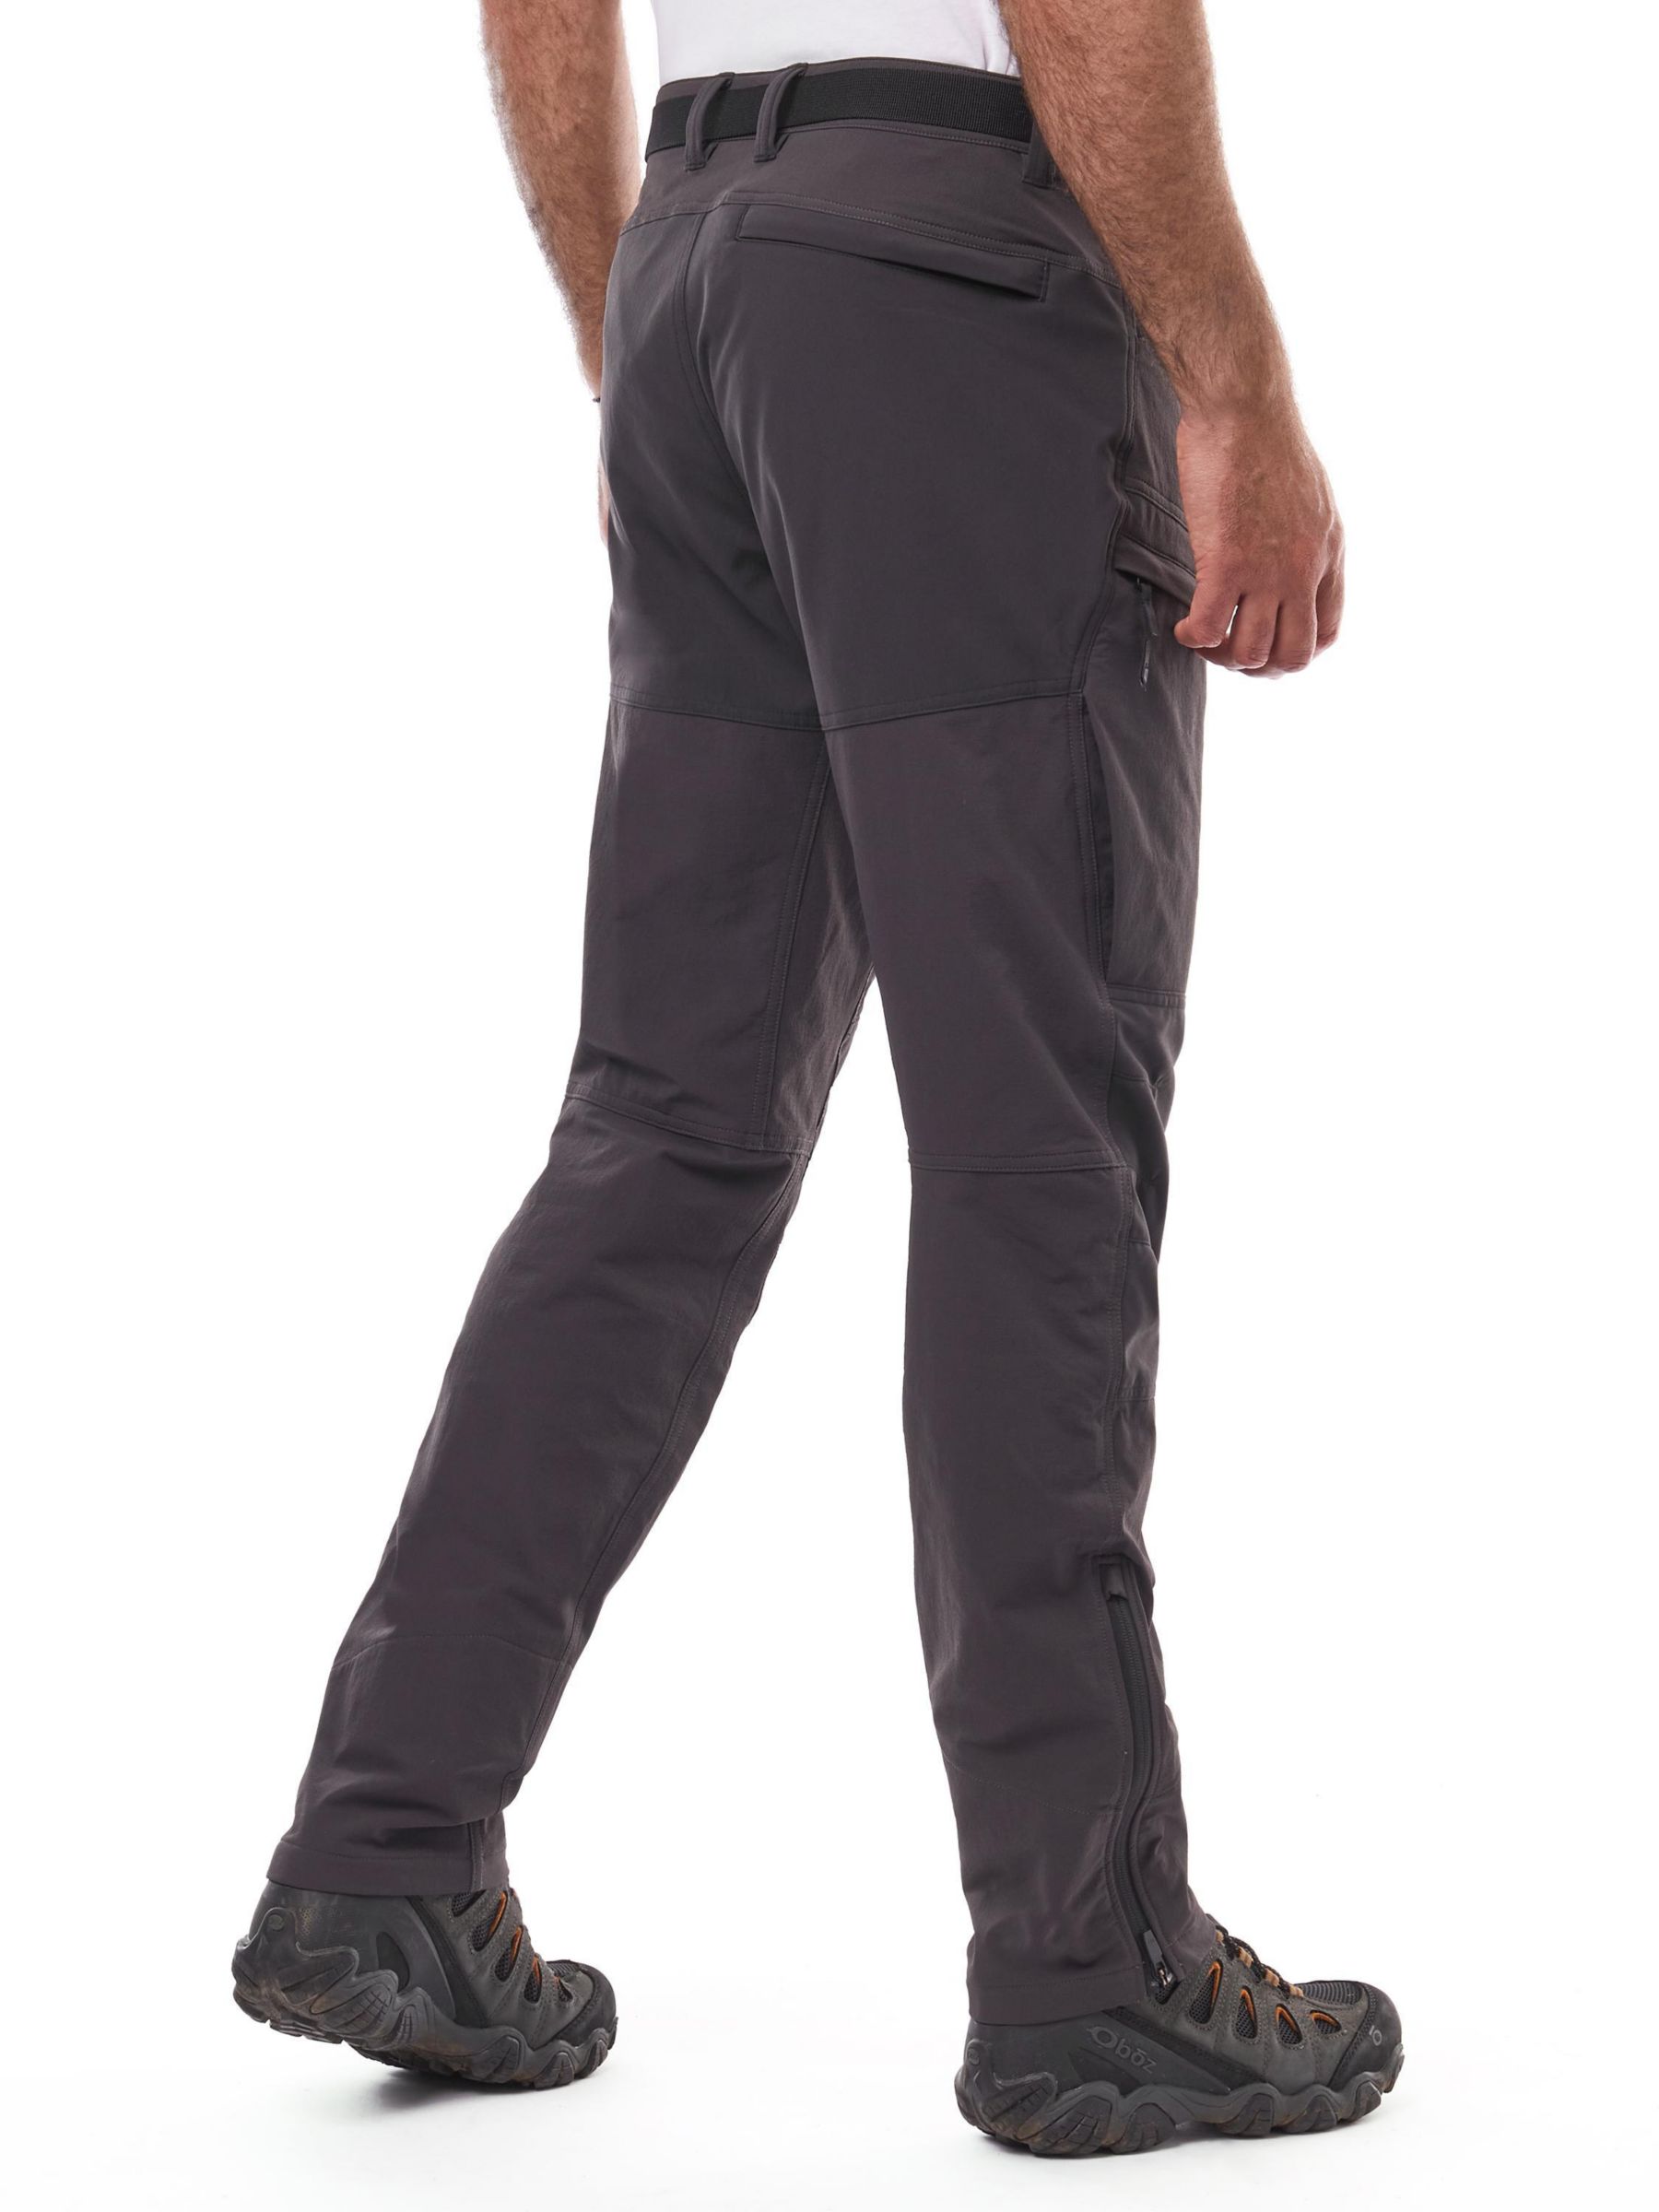 Rohan Fjell Hiking Trousers, Carbon/Black, 30S